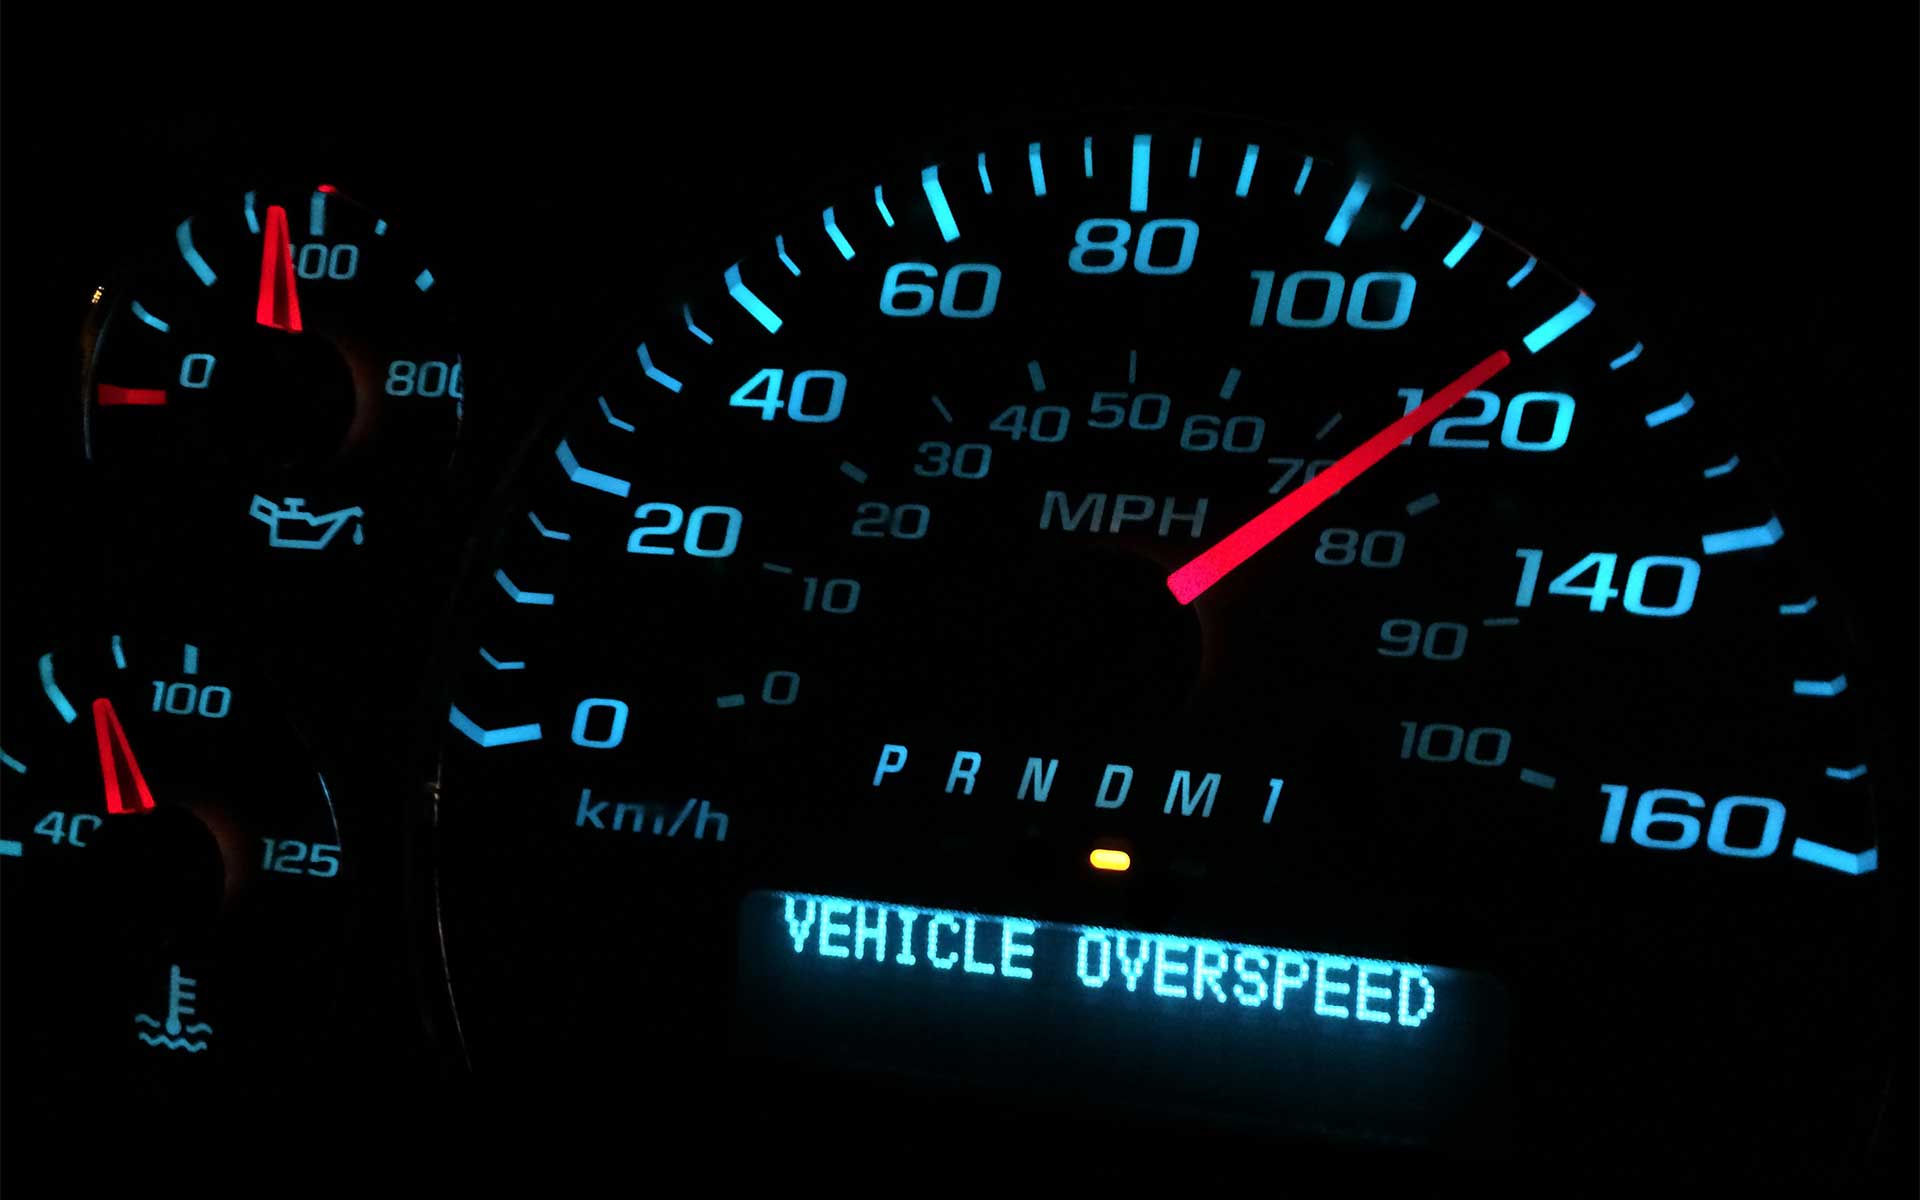 Vehicle Overspeed as Reckless Driving